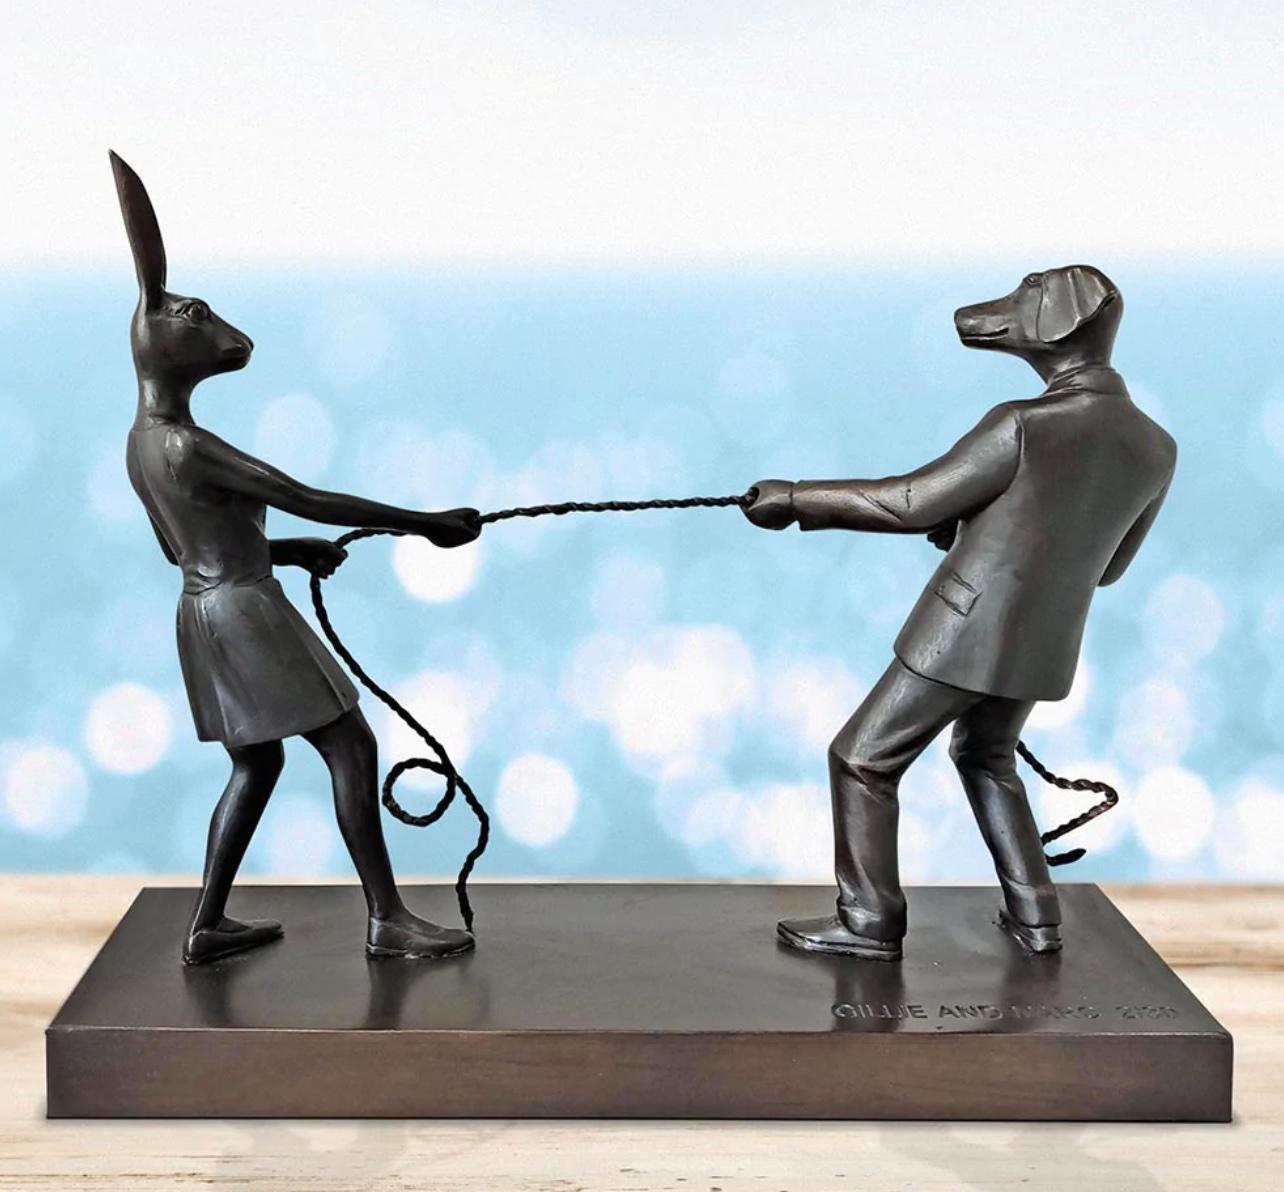 Titled: Tug Of Love 
Authentic Bronze Sculpture

Description:
This authentic bronze sculpture titled 'Tug Of Love' by artists Gillie and Marc has been meticulously crafted in bronze. It features a Gillie and Marcs famous dogman and rabbitwoman